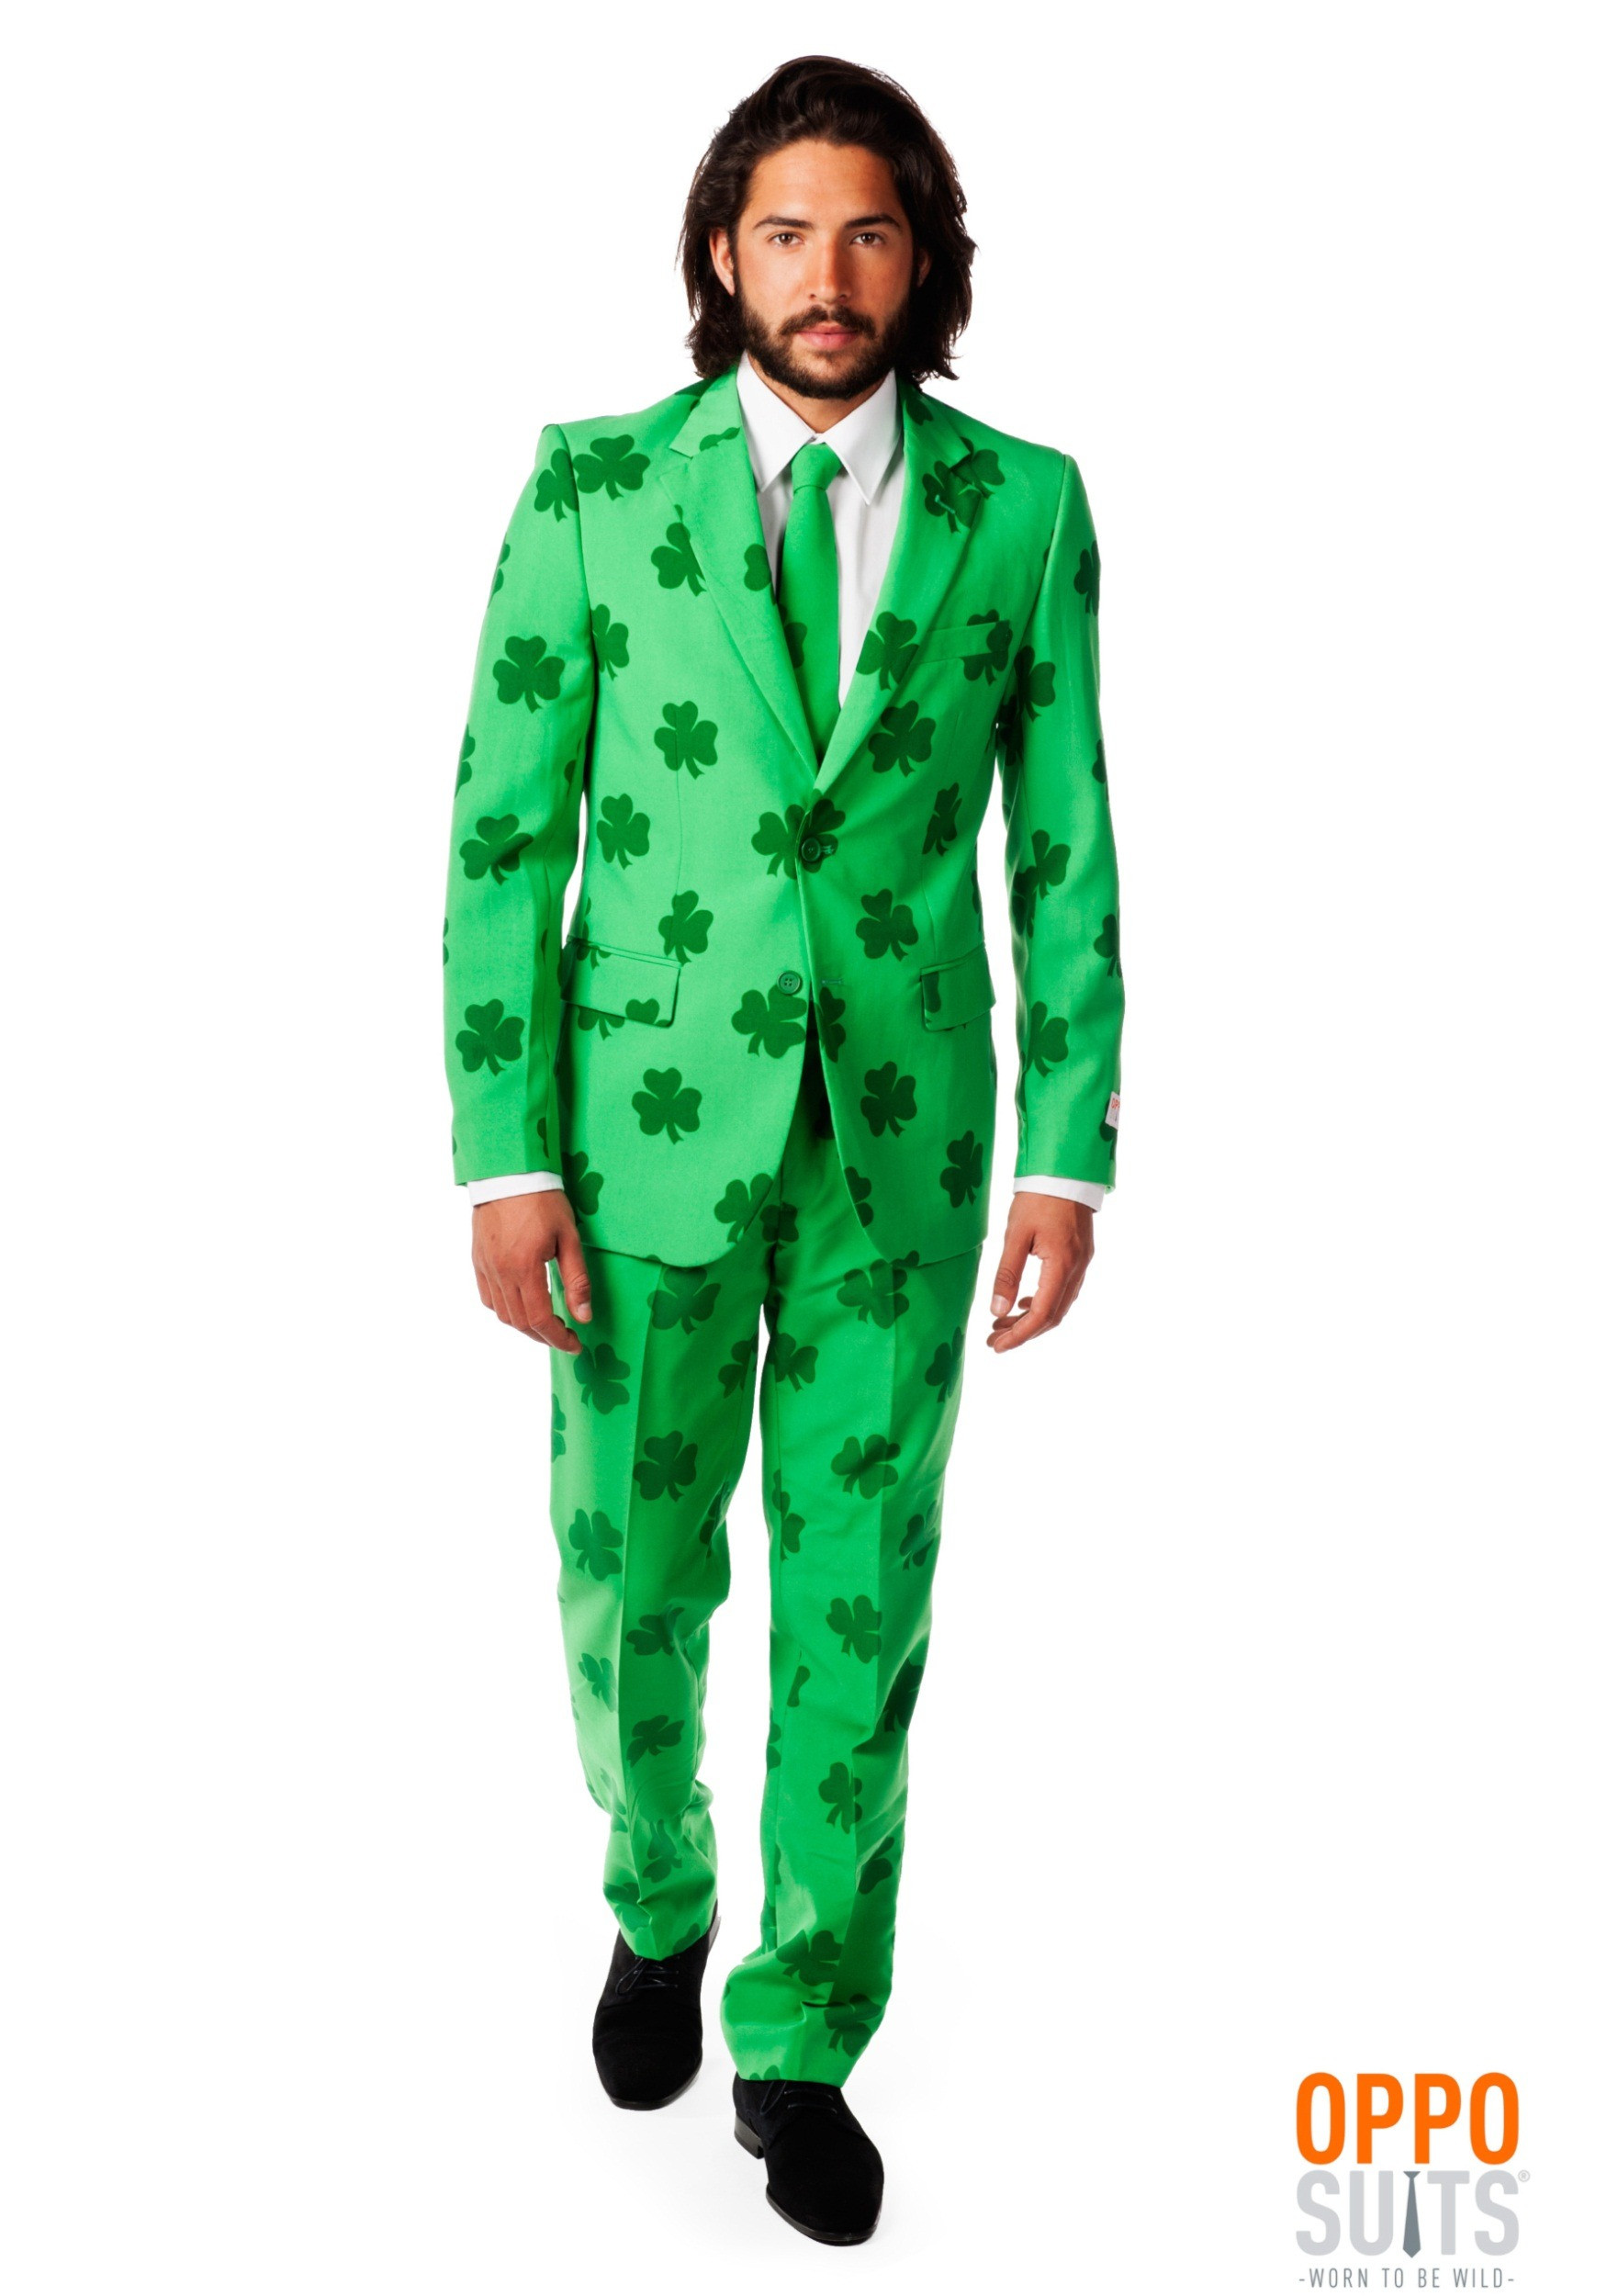 St Patrick's Day Outfit Ideas For Guys
 Mens OppoSuits Green St Patrick s Day Costume Suit